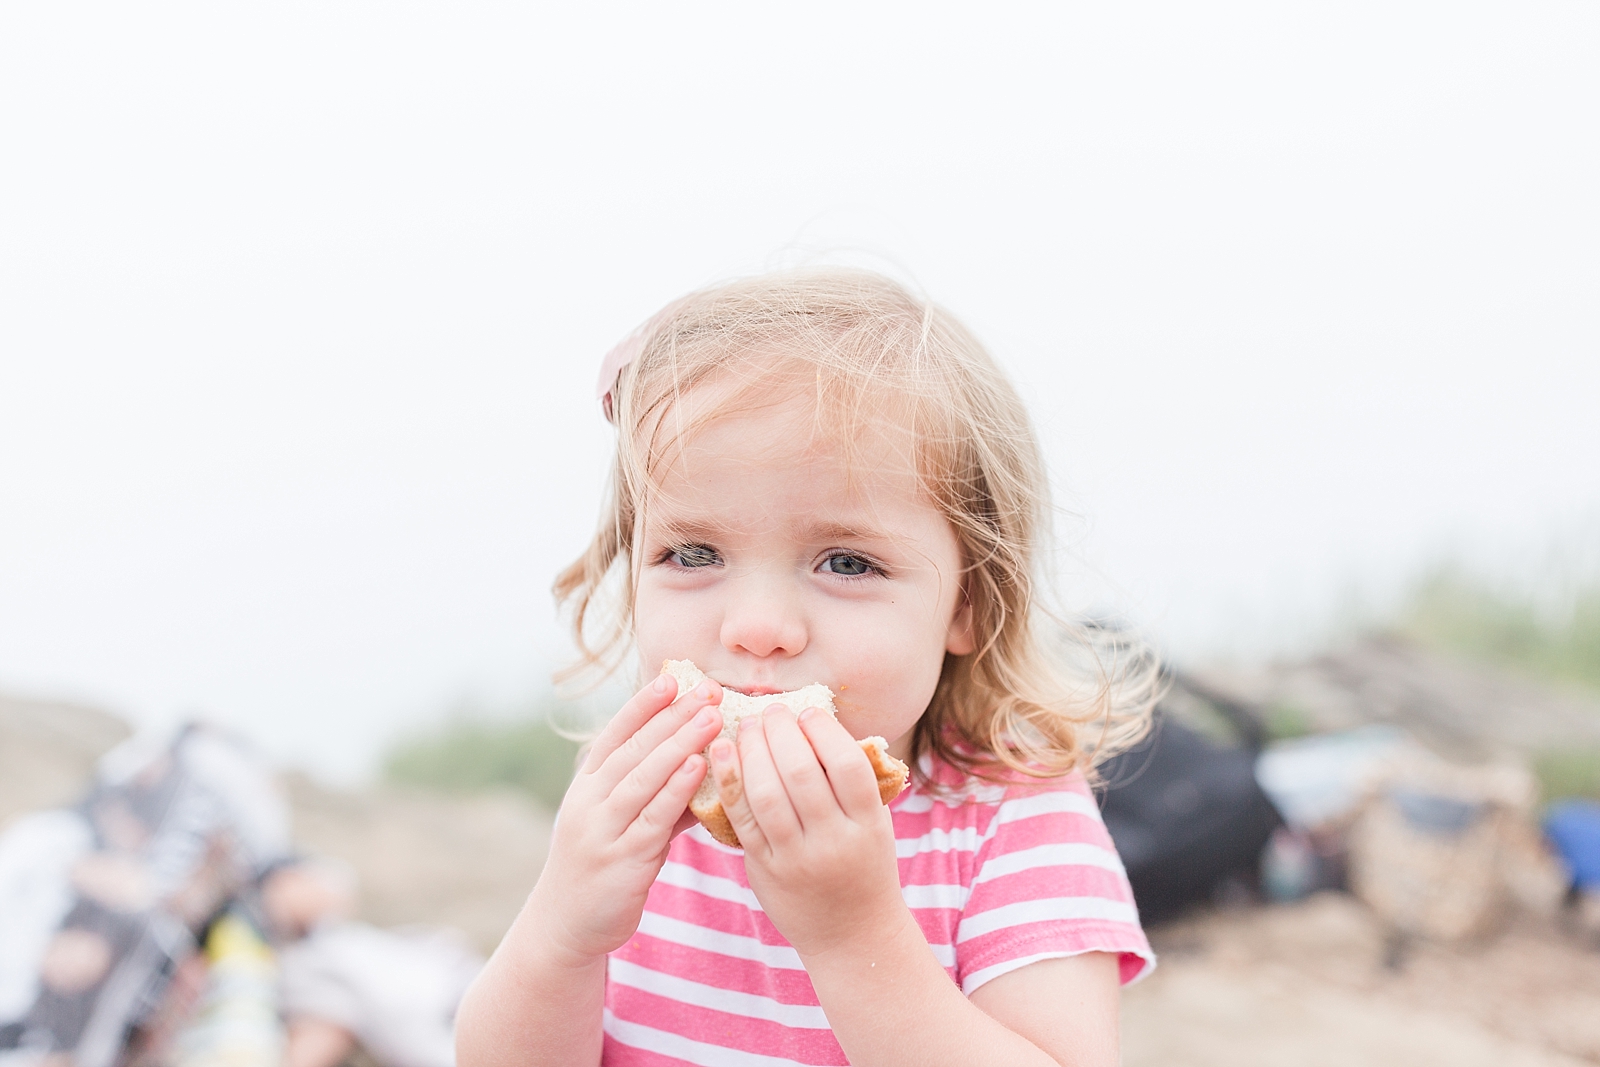 Black Balsam Knob little girl in a pink striped dress eating a sandwich Photo